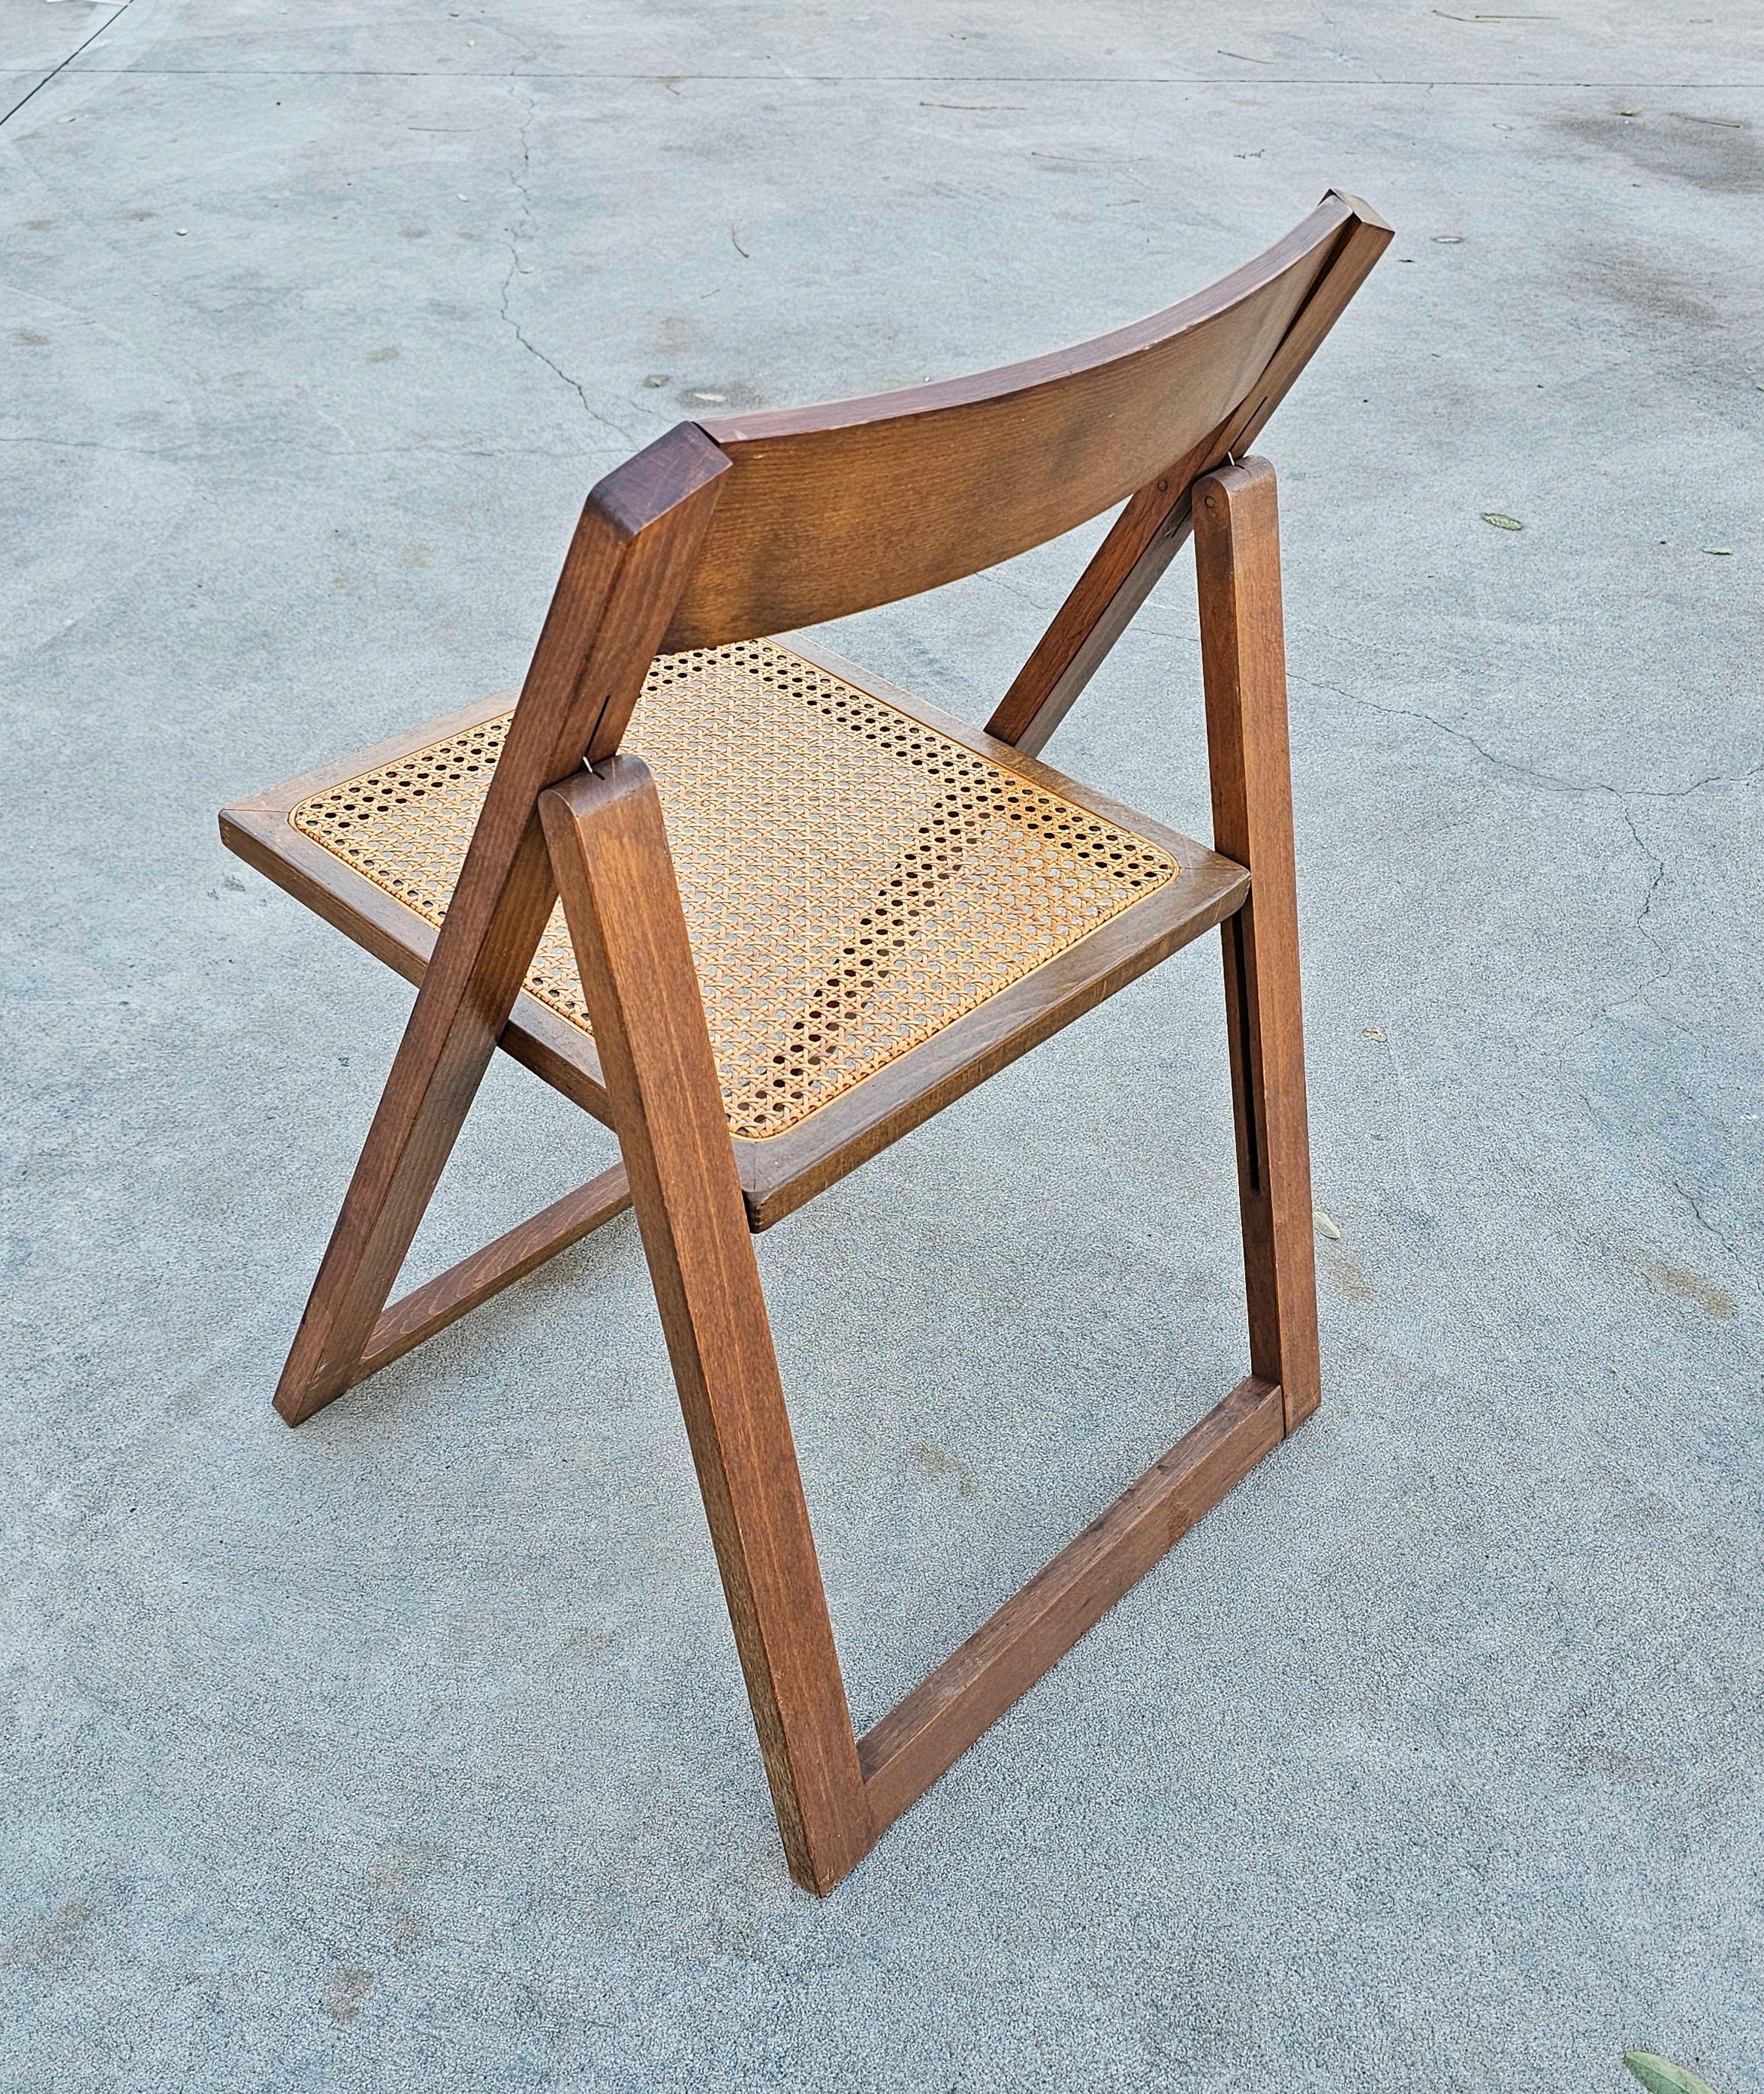 Set of 6 Folding Chairs with Cane Seats in style of Aldo Jacober, Italy 1980s For Sale 2